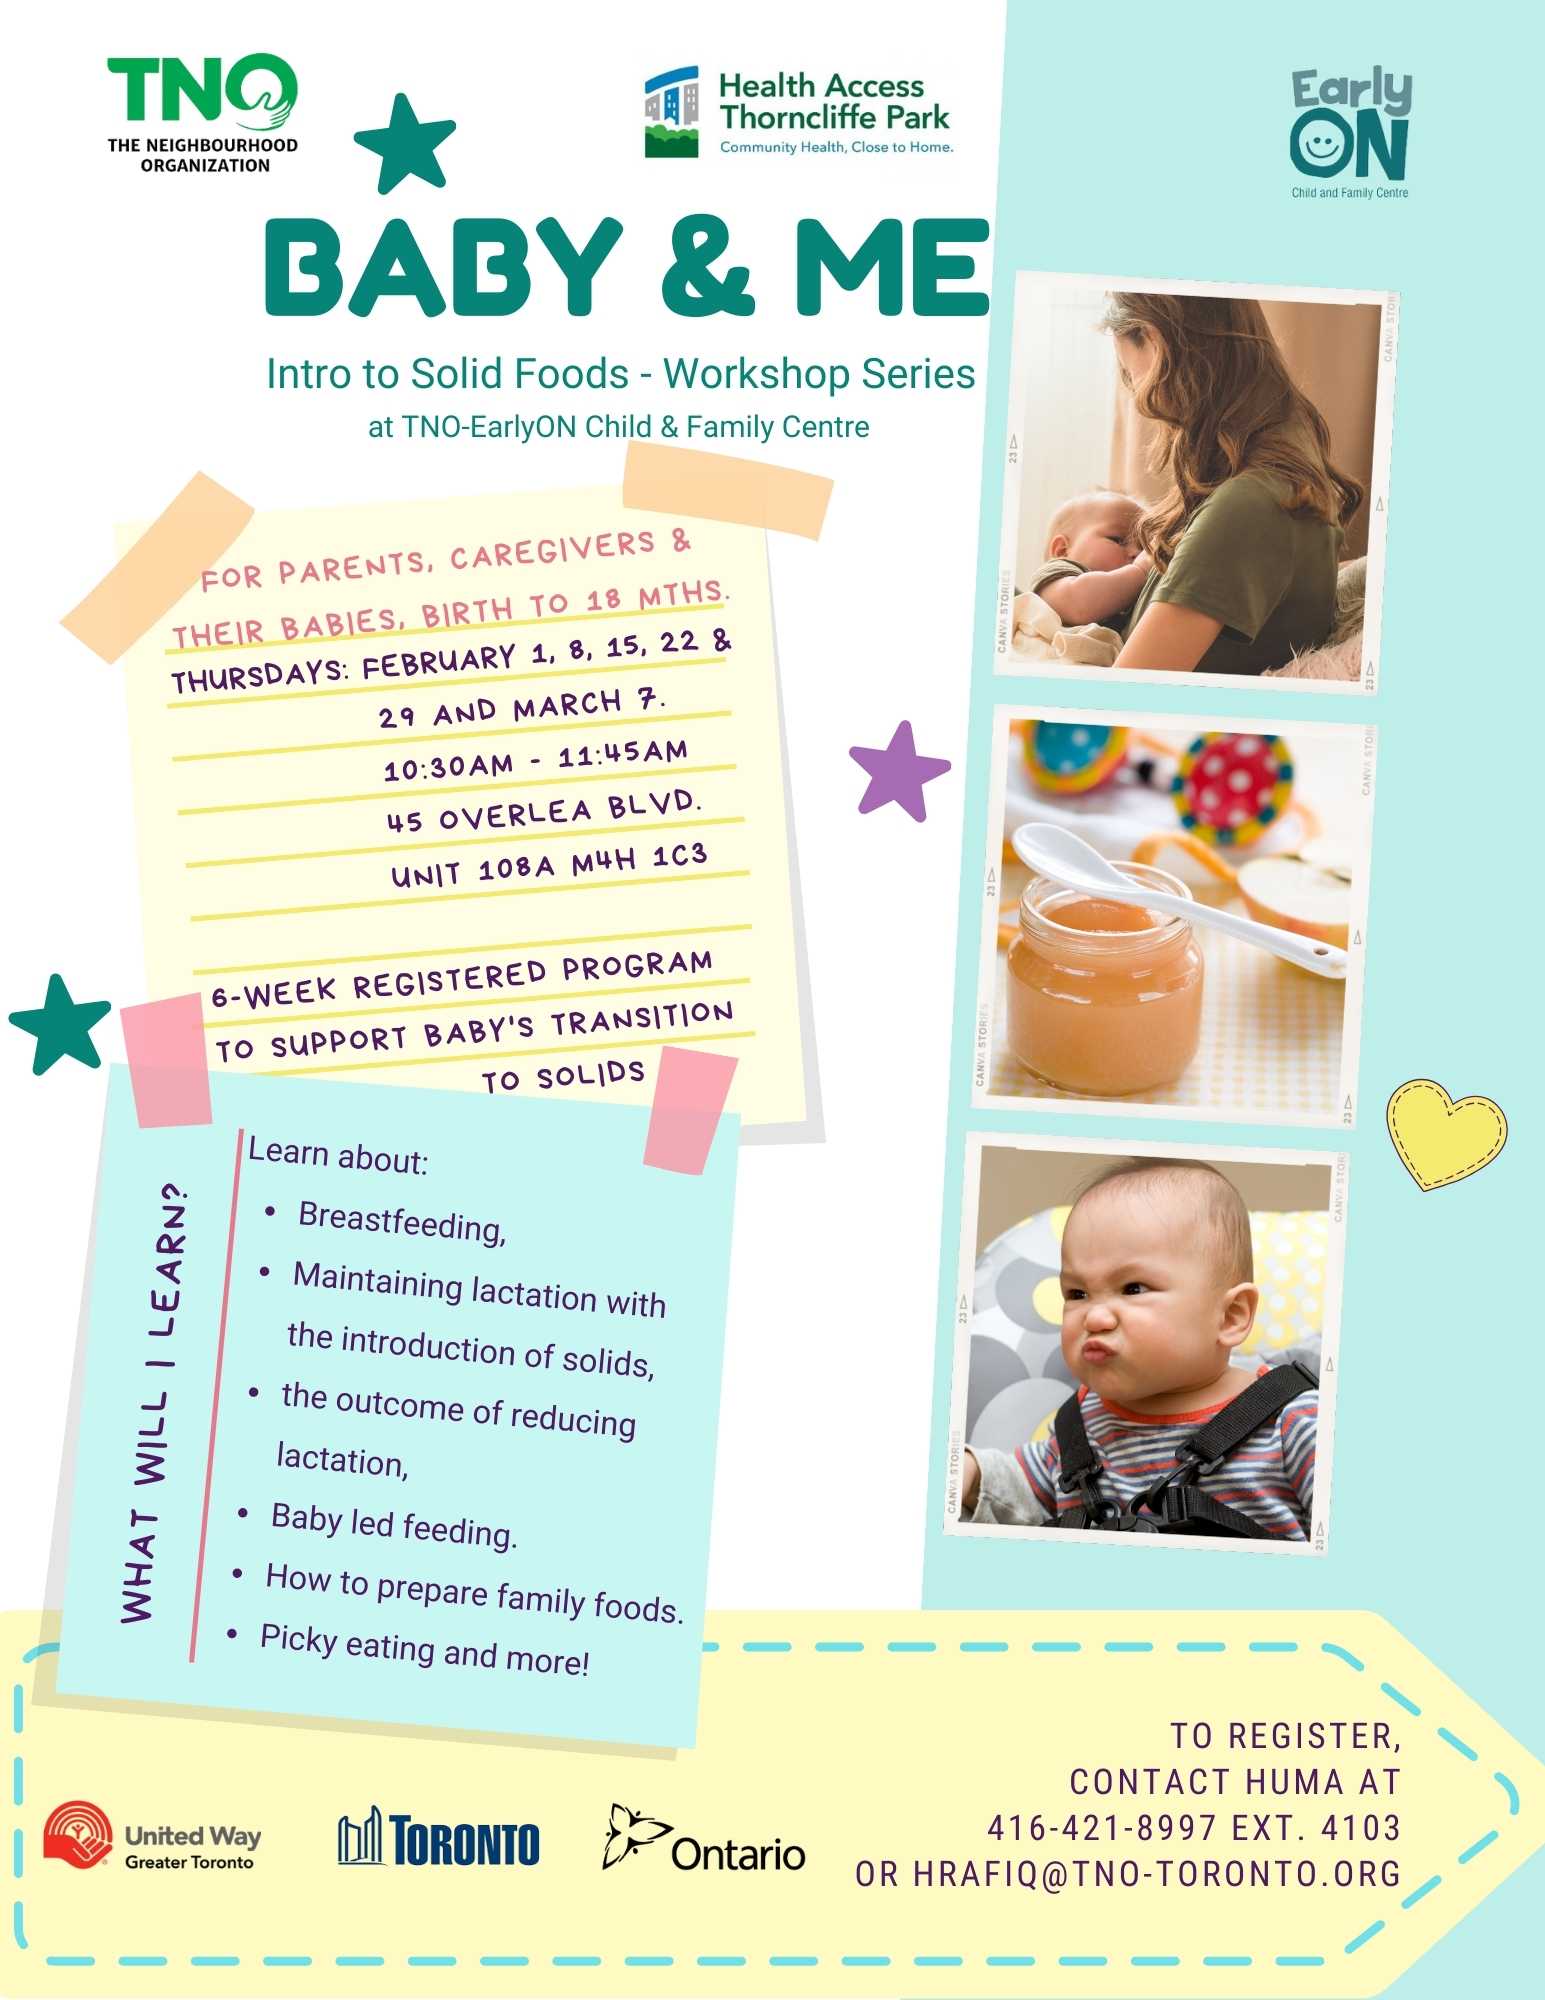 Baby & Me - Intro to Solid Foods